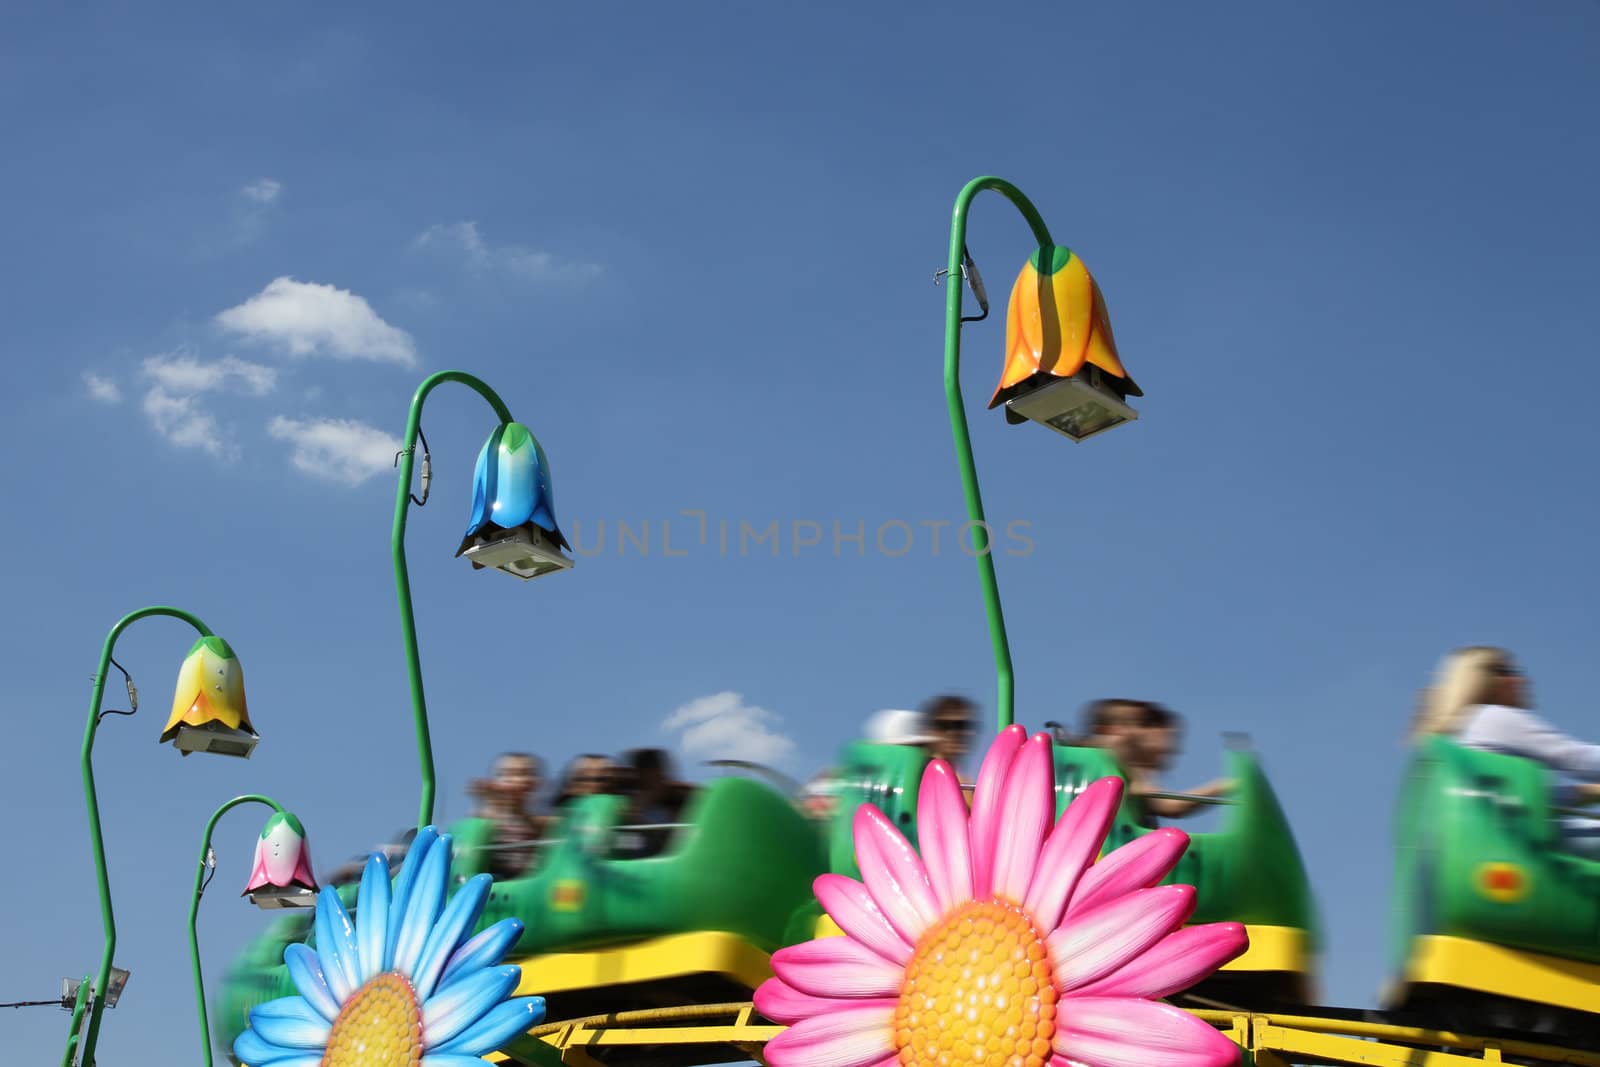 rollercoaster for childrens in an amusement park against blue sky